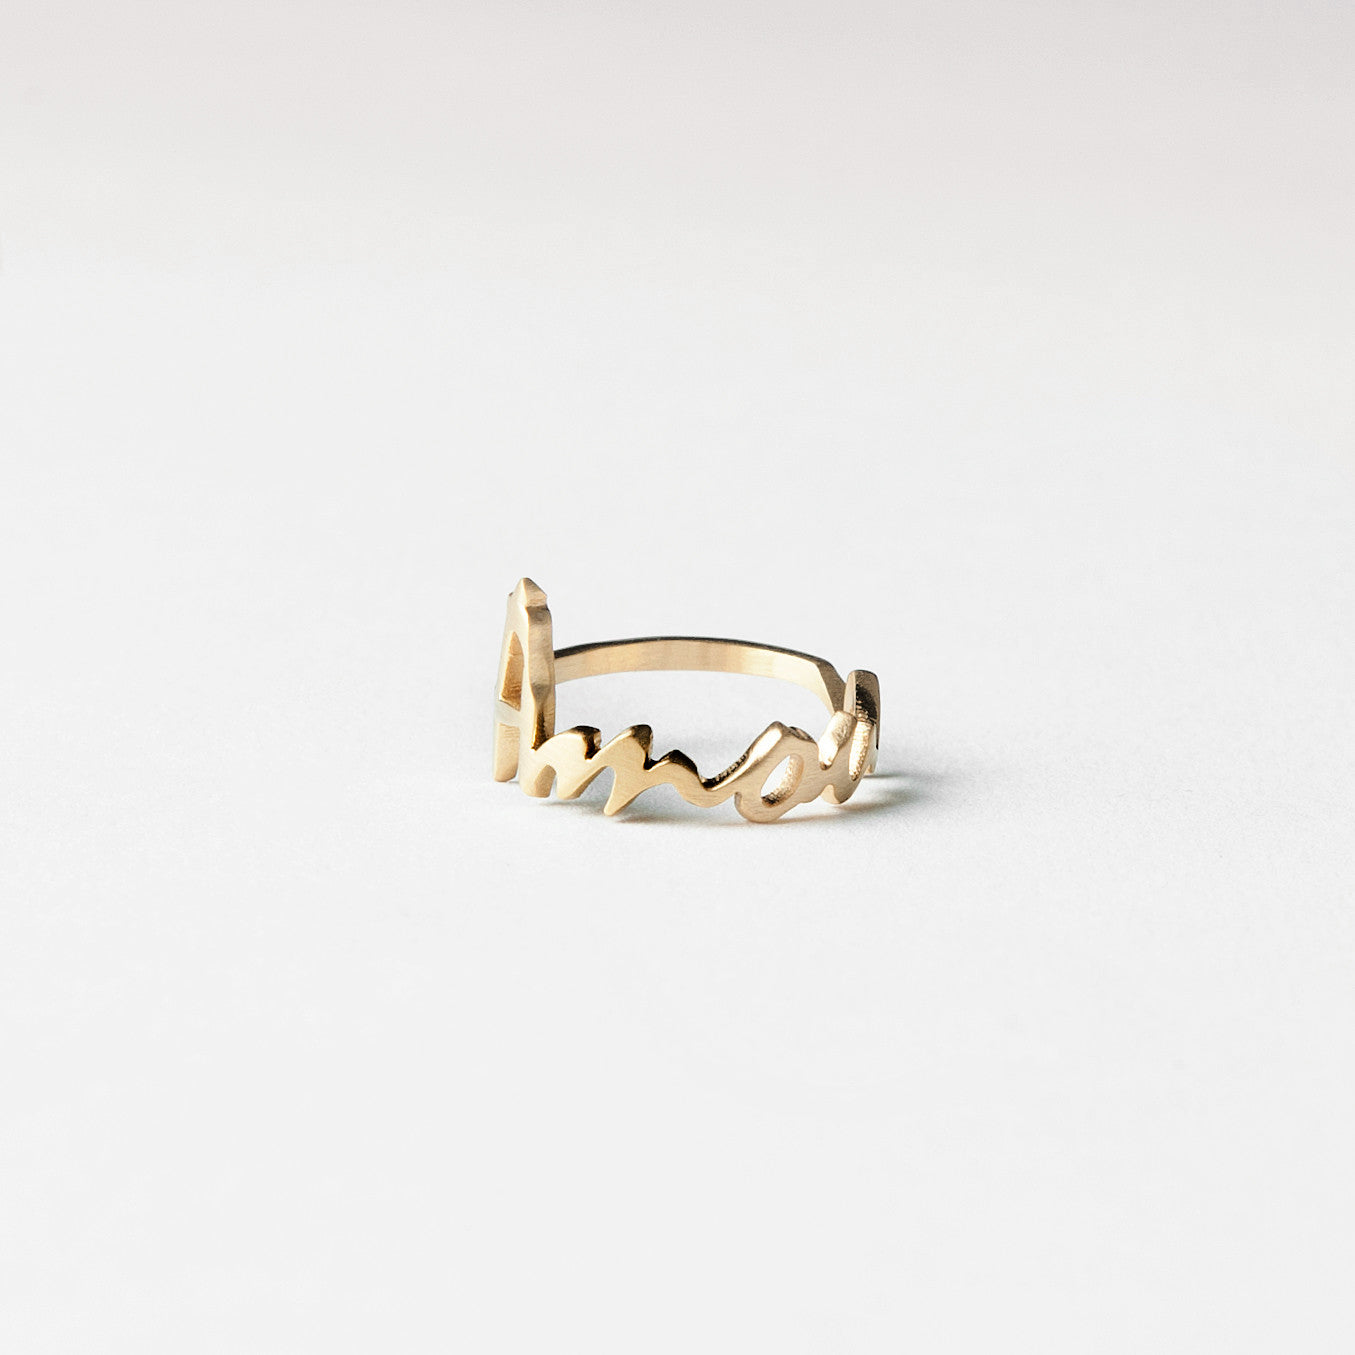 Ring "Amour"